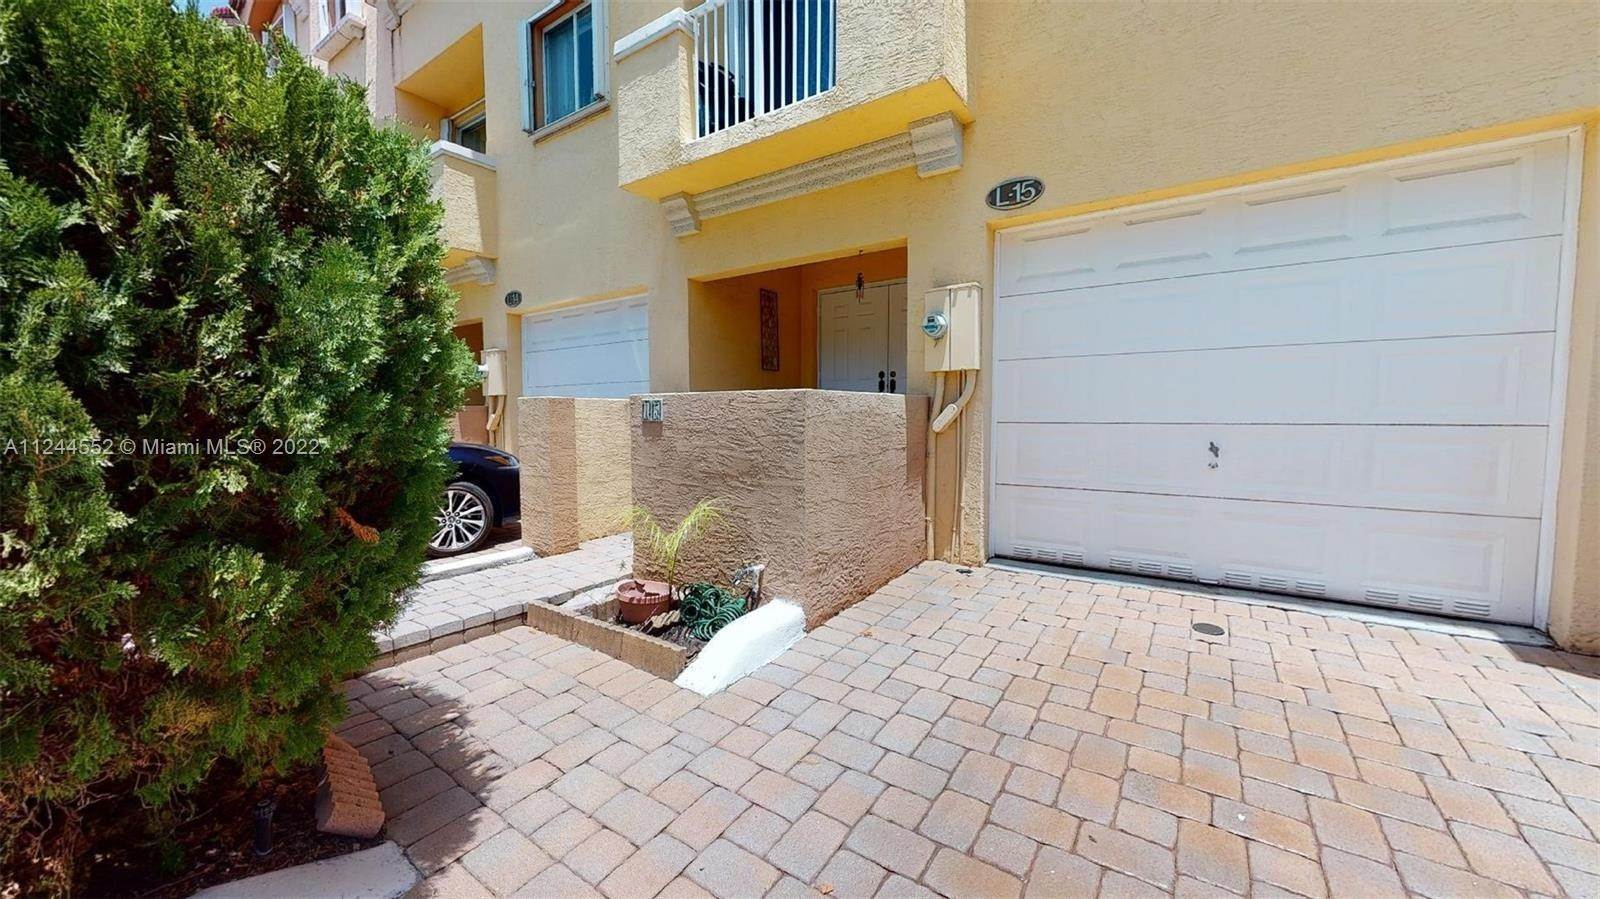 29. Townhouse for Sale at Aventura, FL 33180